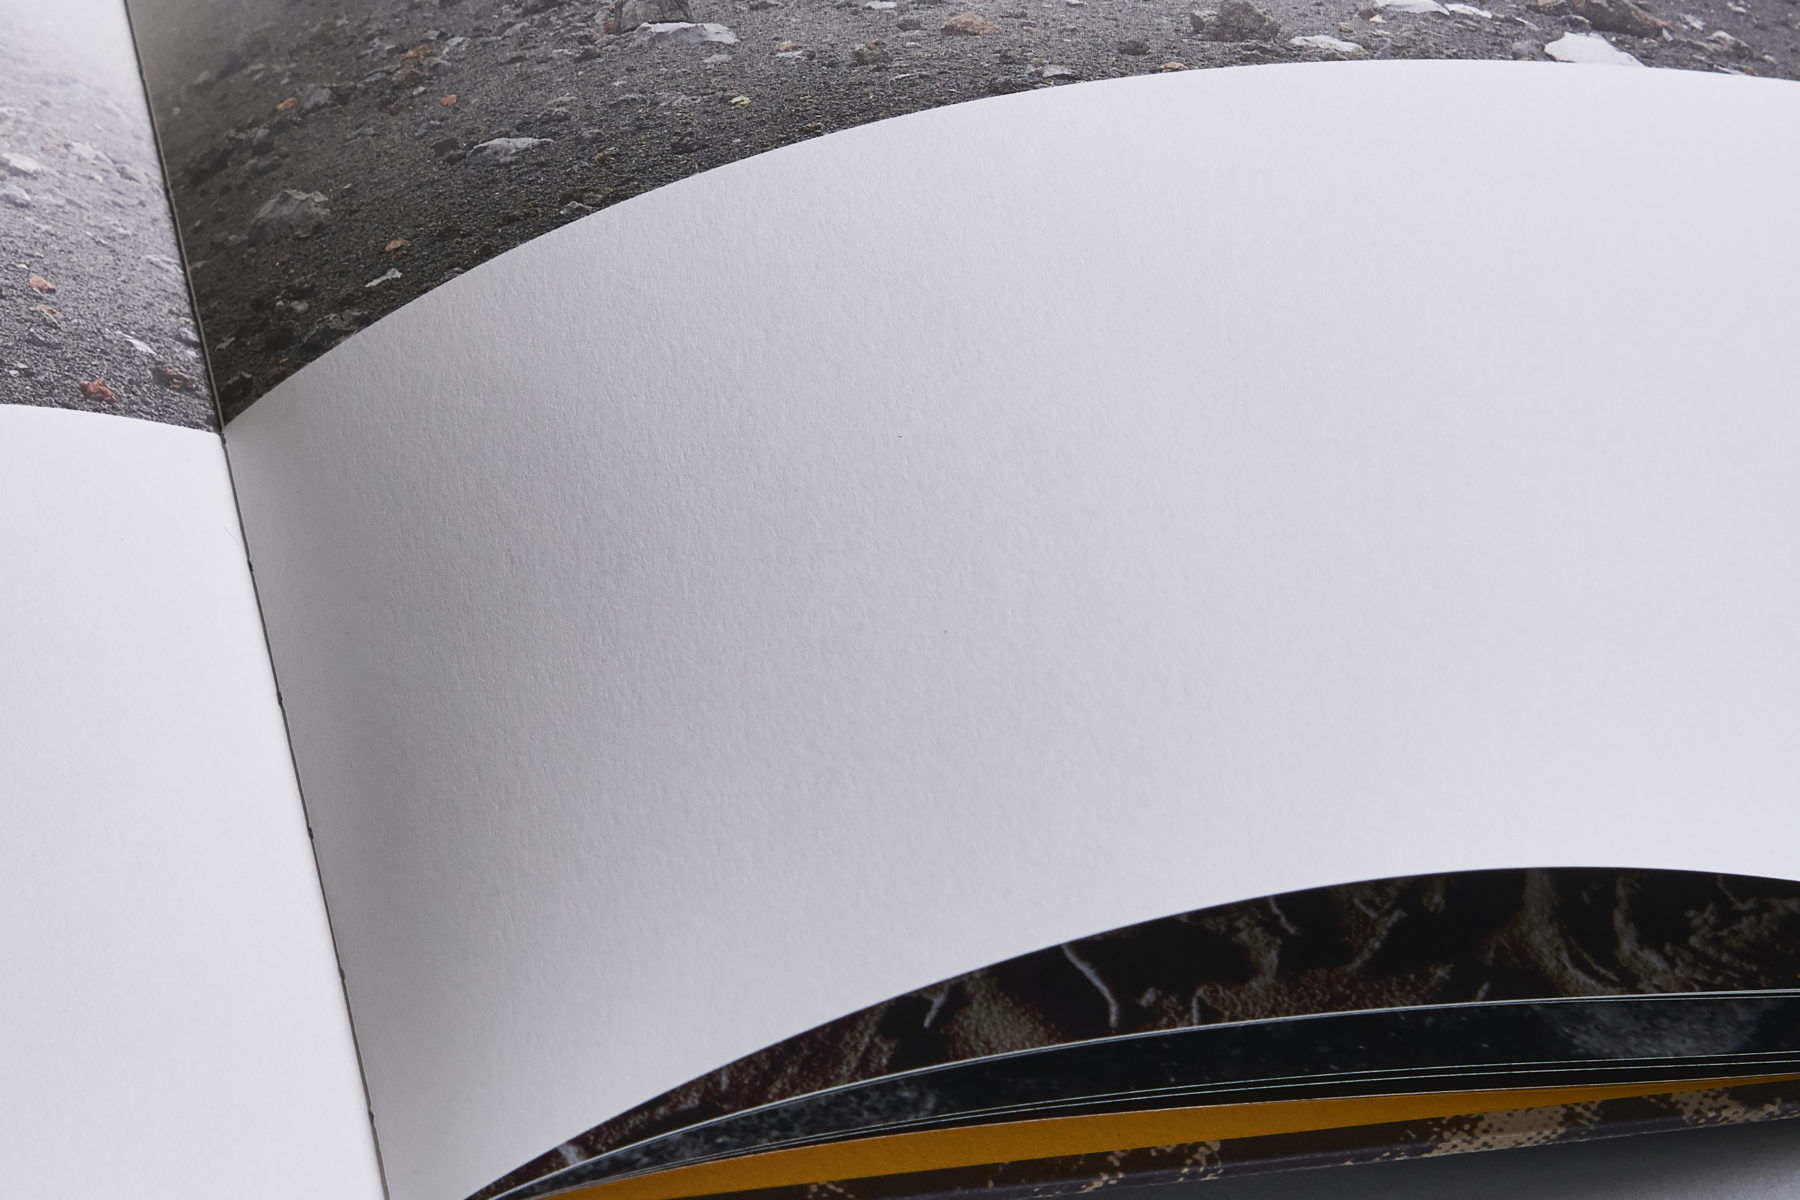 Open pages of a bespoke art book